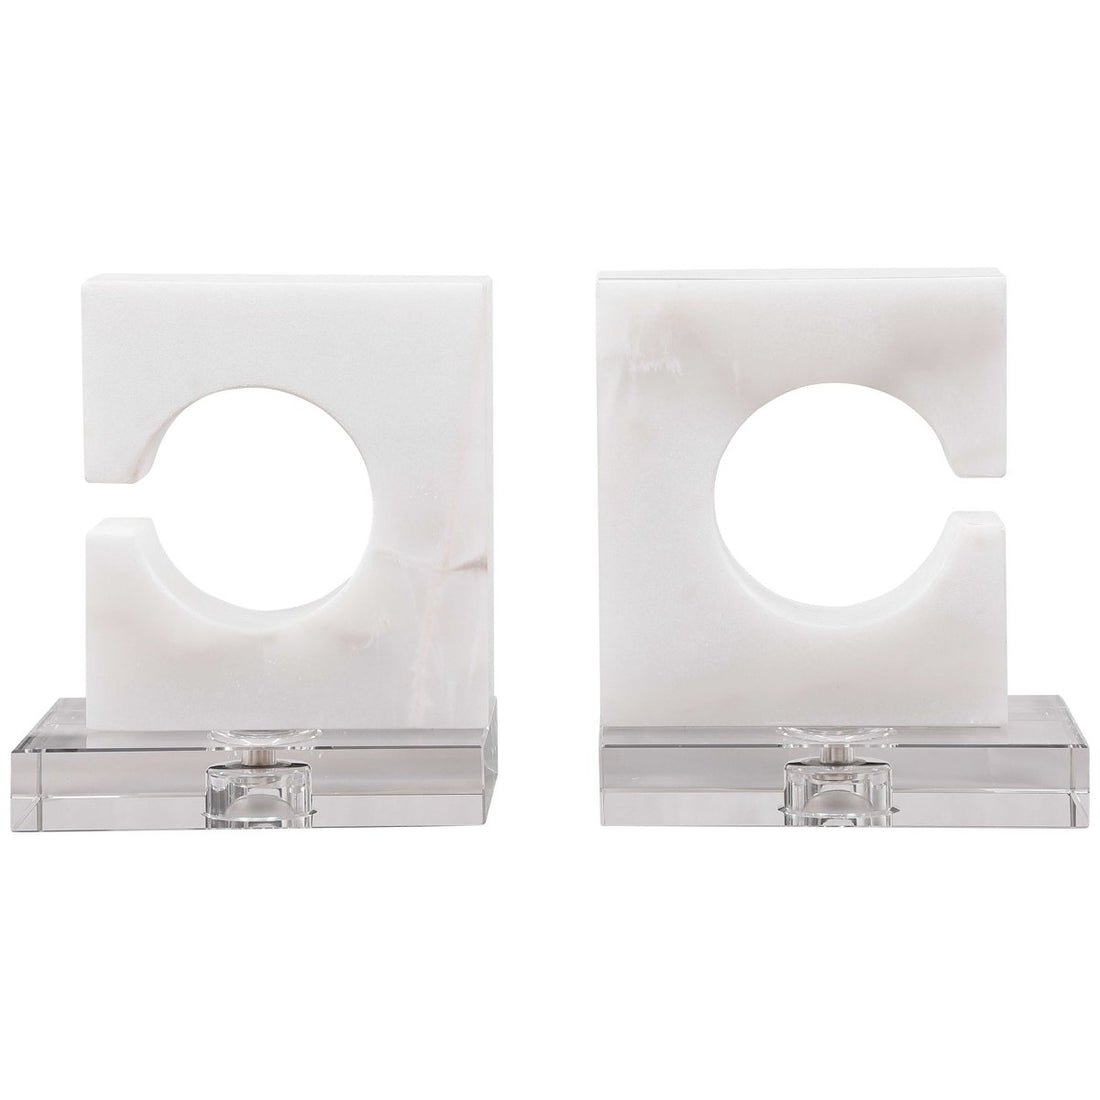 Uttermost Clarin White & Gray Bookends, Set of 2